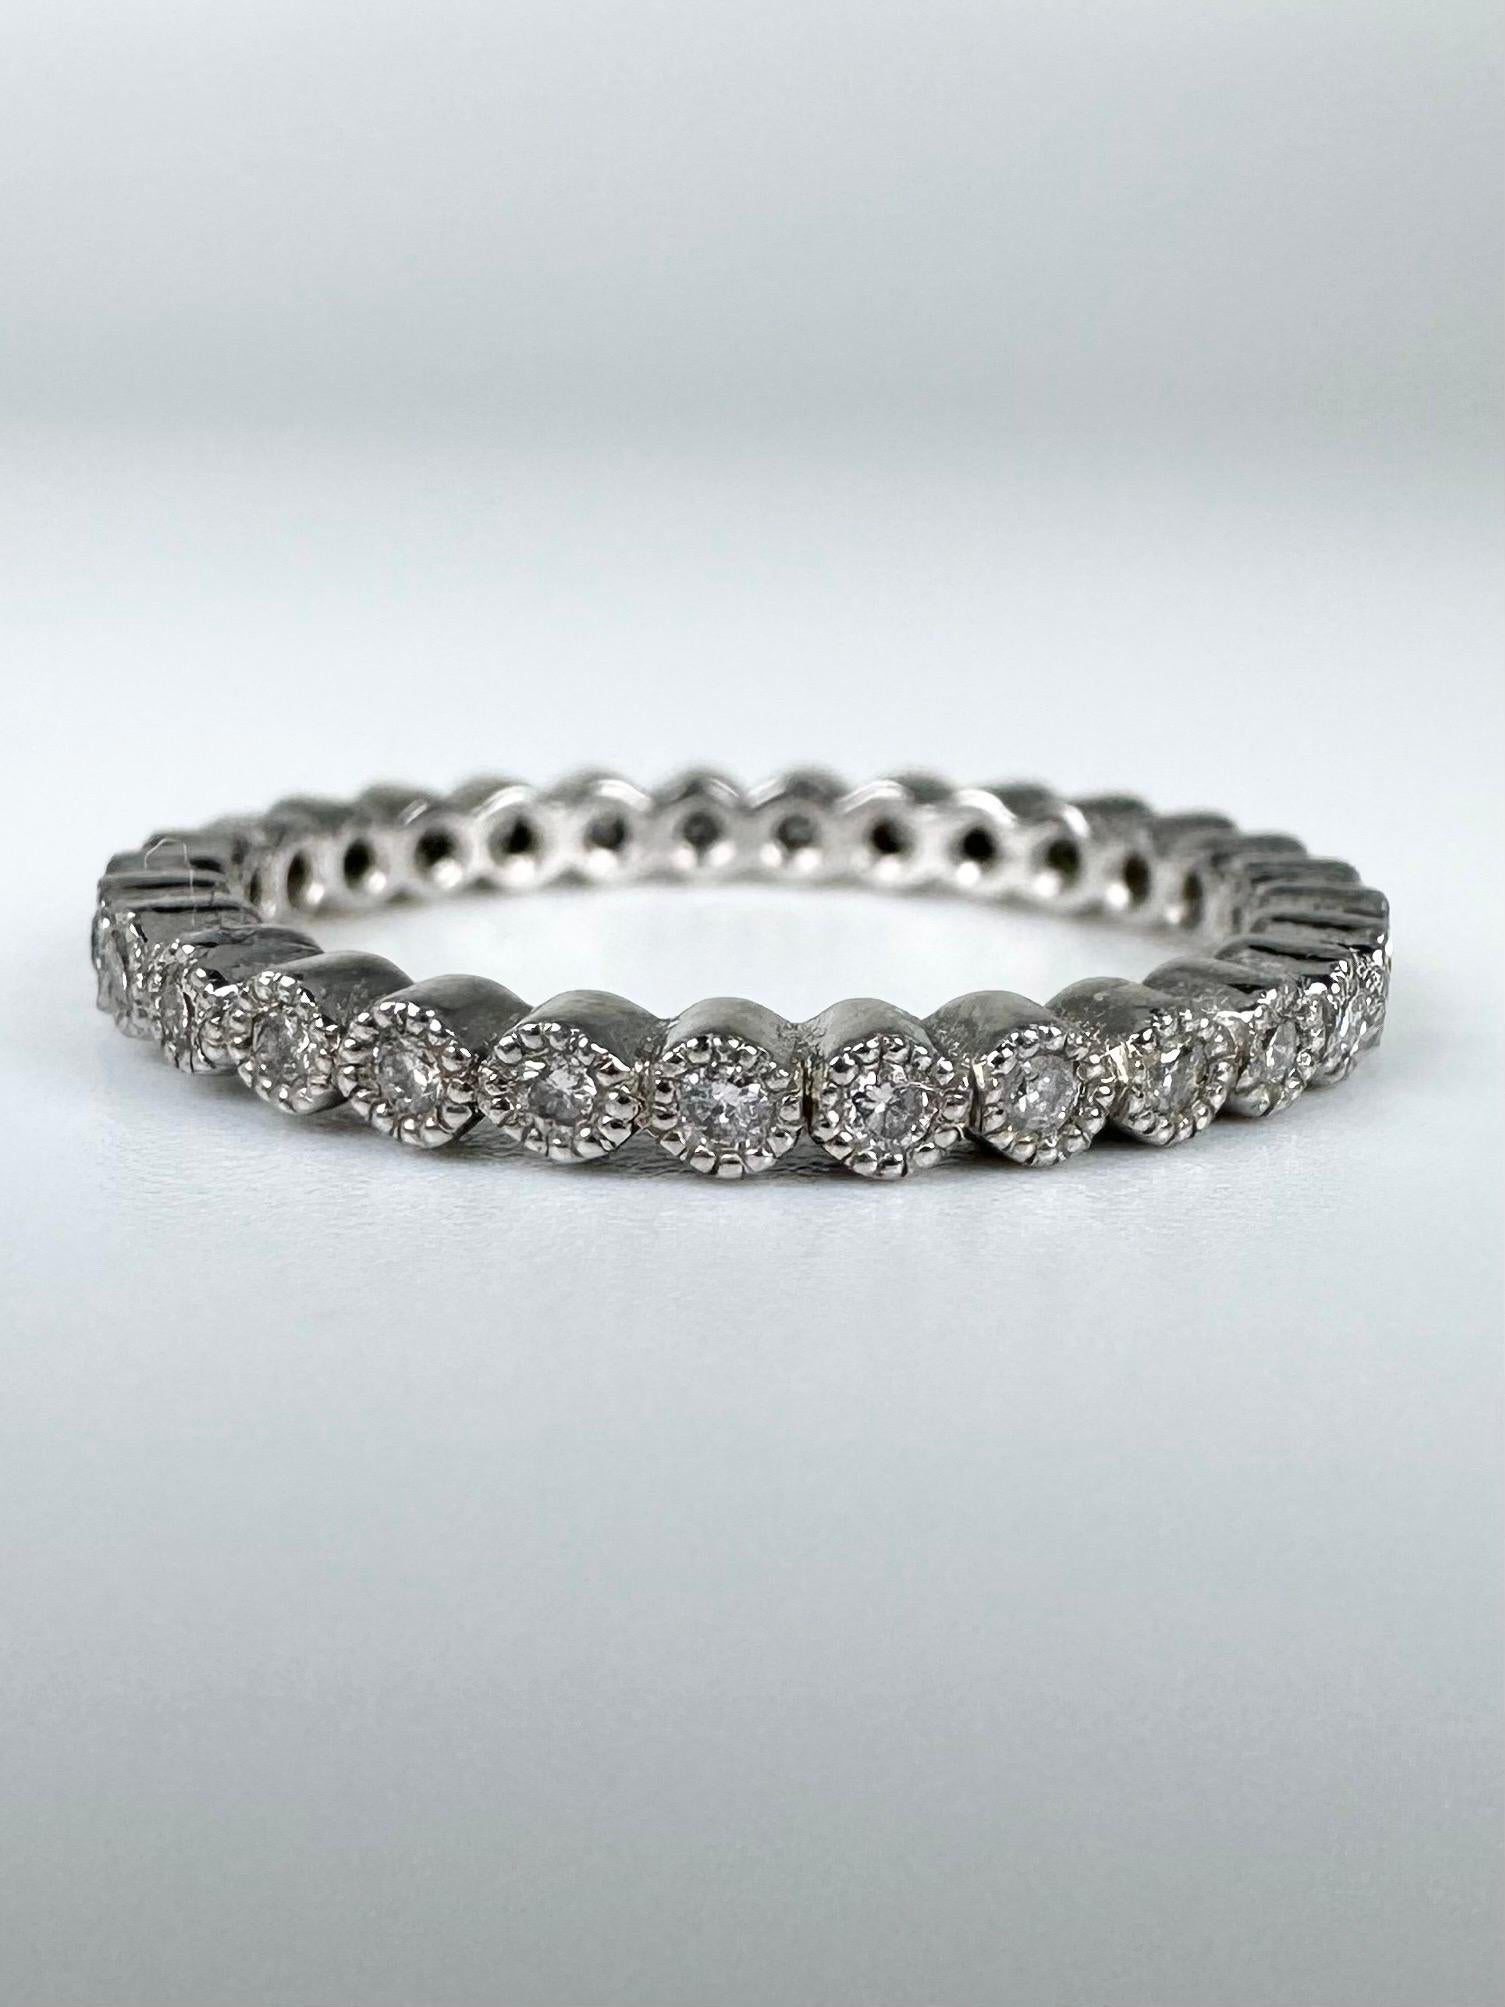 Eternity diamond ring made with hand finish design called milgrain around every diamond, the ring is performed in 14KT white gold and cannot be resized.
GOLD: 14KT gold
NATURAL DIAMOND(S)
Clarity/Color: VS/G
Carat:0.29ct
Cut:Round